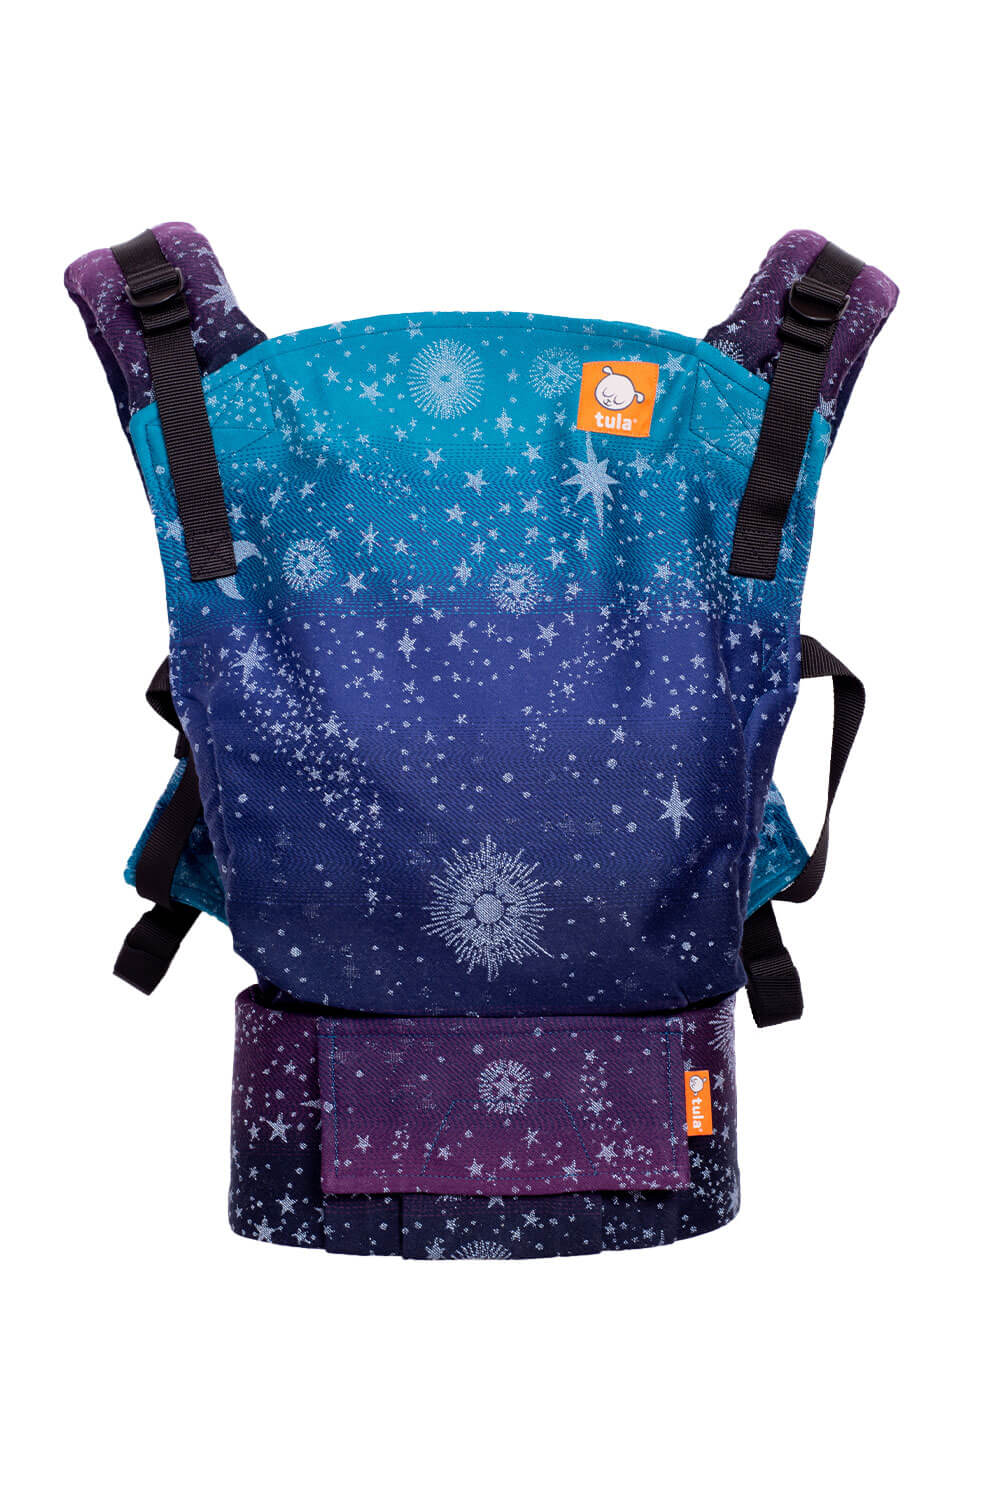 Constellation Evangeline - Signature Woven Free-to-Grow Baby Carrier